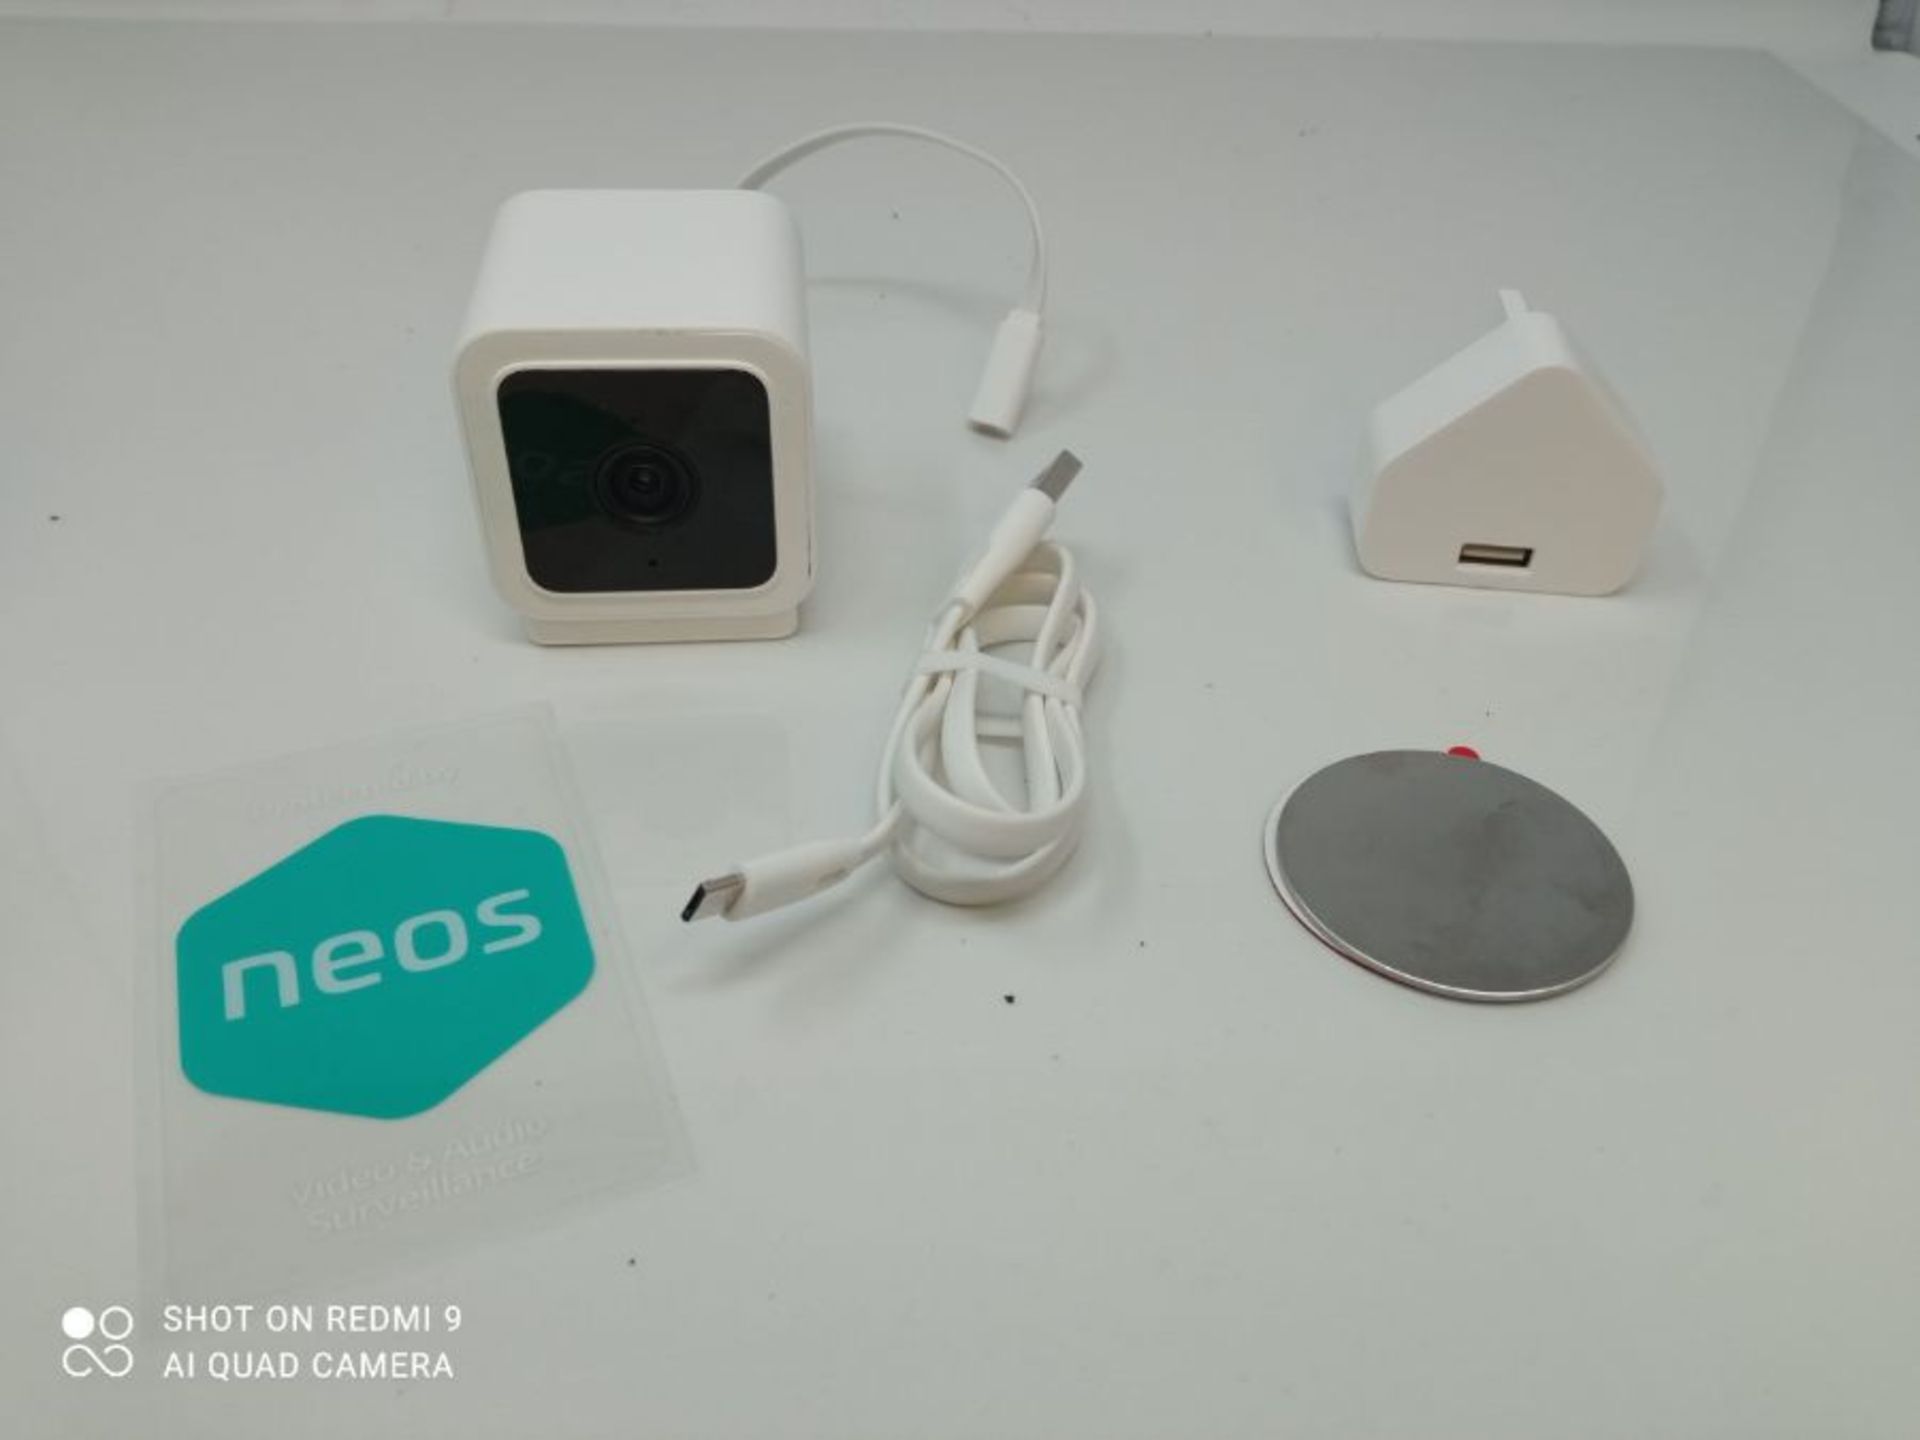 Neos SmartCam | Wi-Fi SmartHome Security Camera, Works with Alexa, 1080P HD Video, Nig - Image 2 of 3